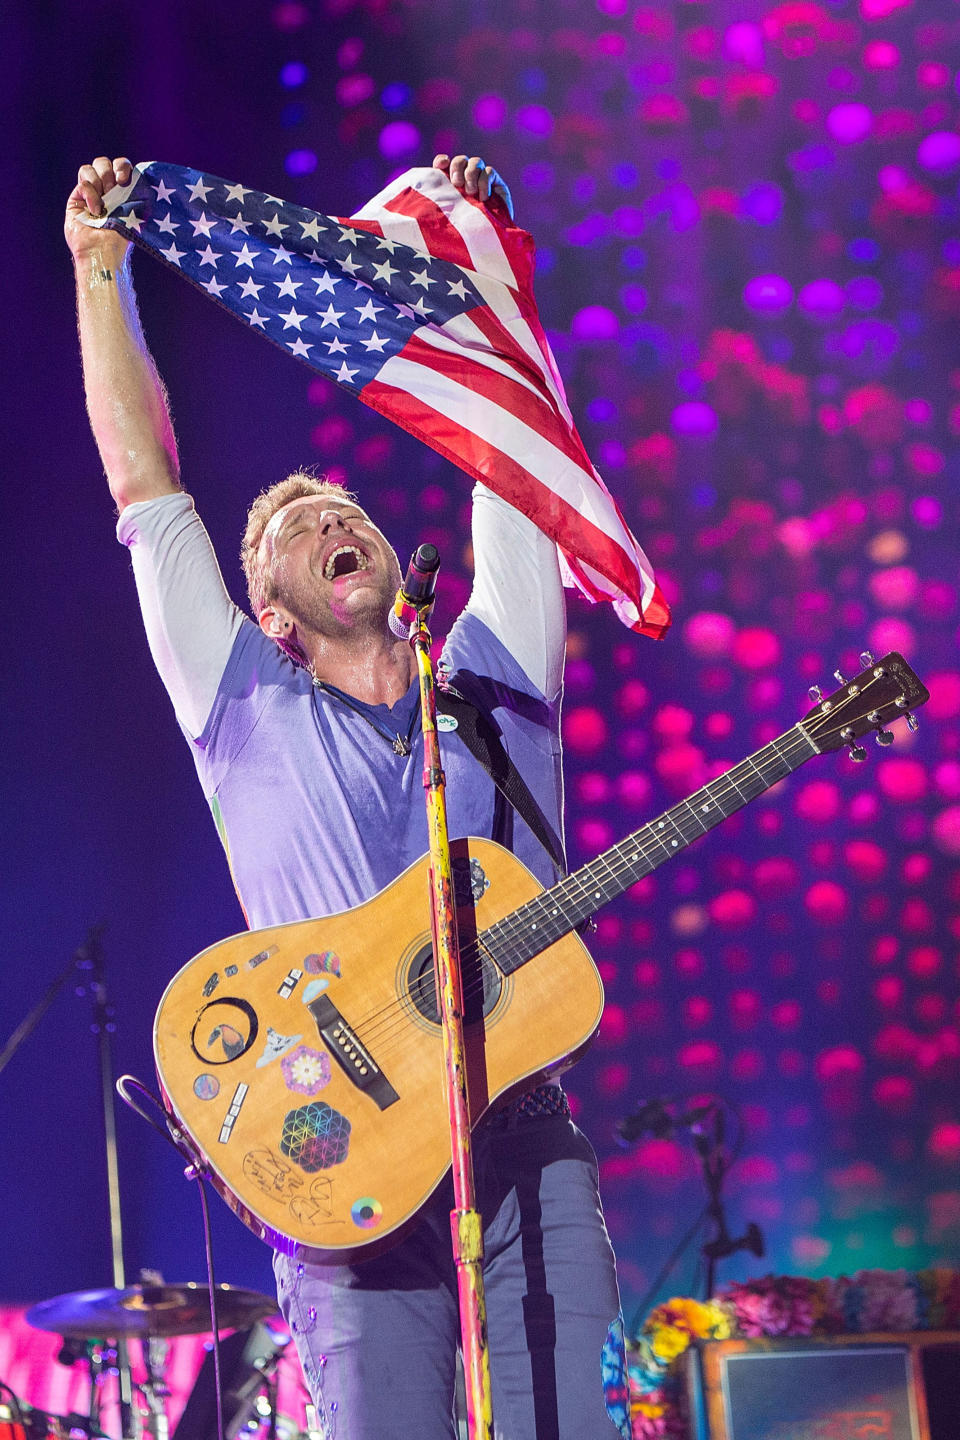 <p>In San Diego, the Coldplay frontman held up the U.S. flag during a concert. The Friday edition of that same show featured an appearance by late night host James Corden, who joined the band in a rendition of “Free Fallin” by the late Tom Petty, one of many tributes since Petty’s Oct. 2 death. (Photo: Daniel Knighton/Getty Images) </p>